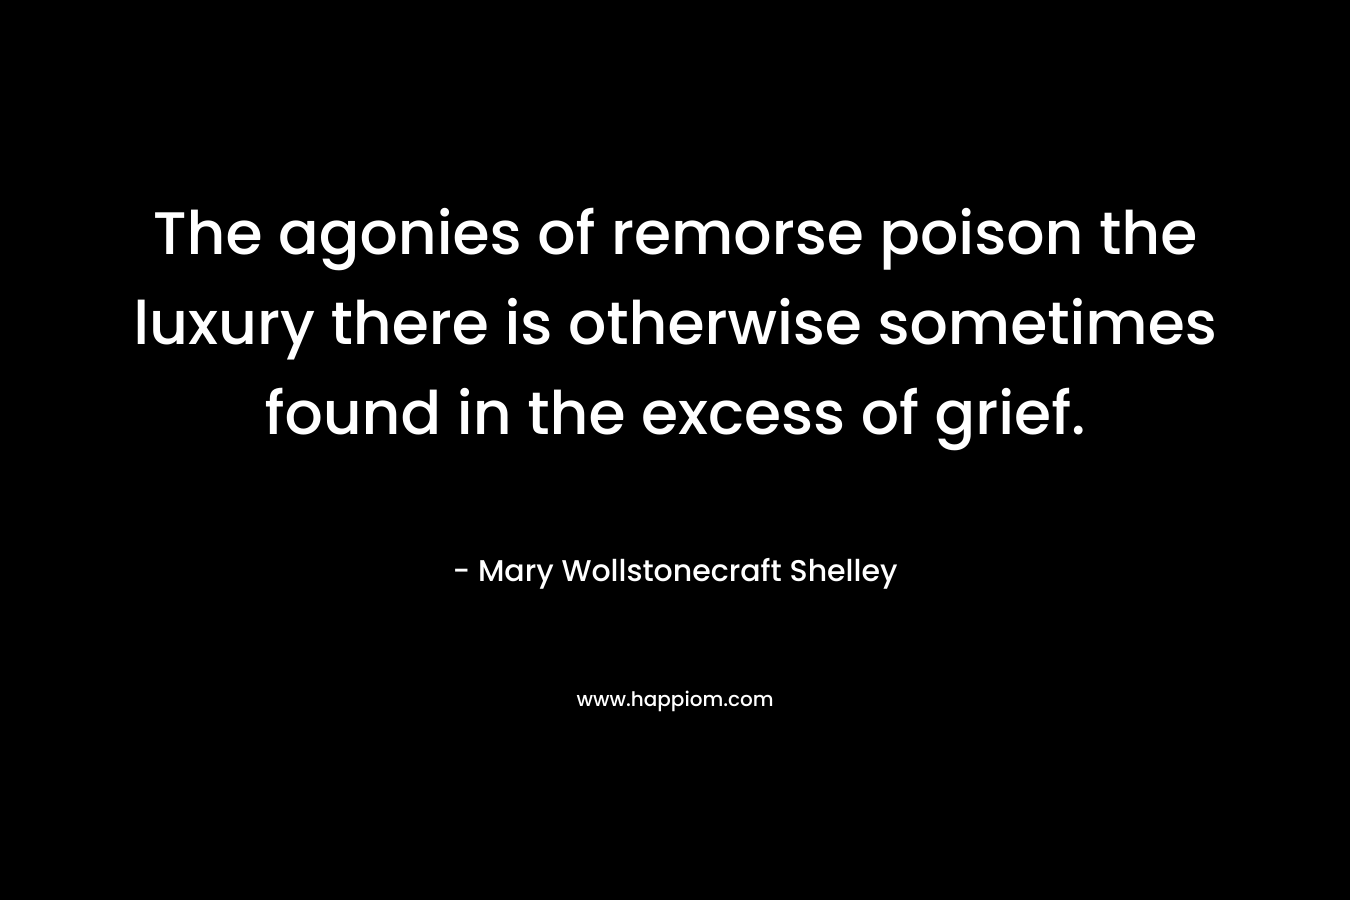 The agonies of remorse poison the luxury there is otherwise sometimes found in the excess of grief. – Mary Wollstonecraft Shelley